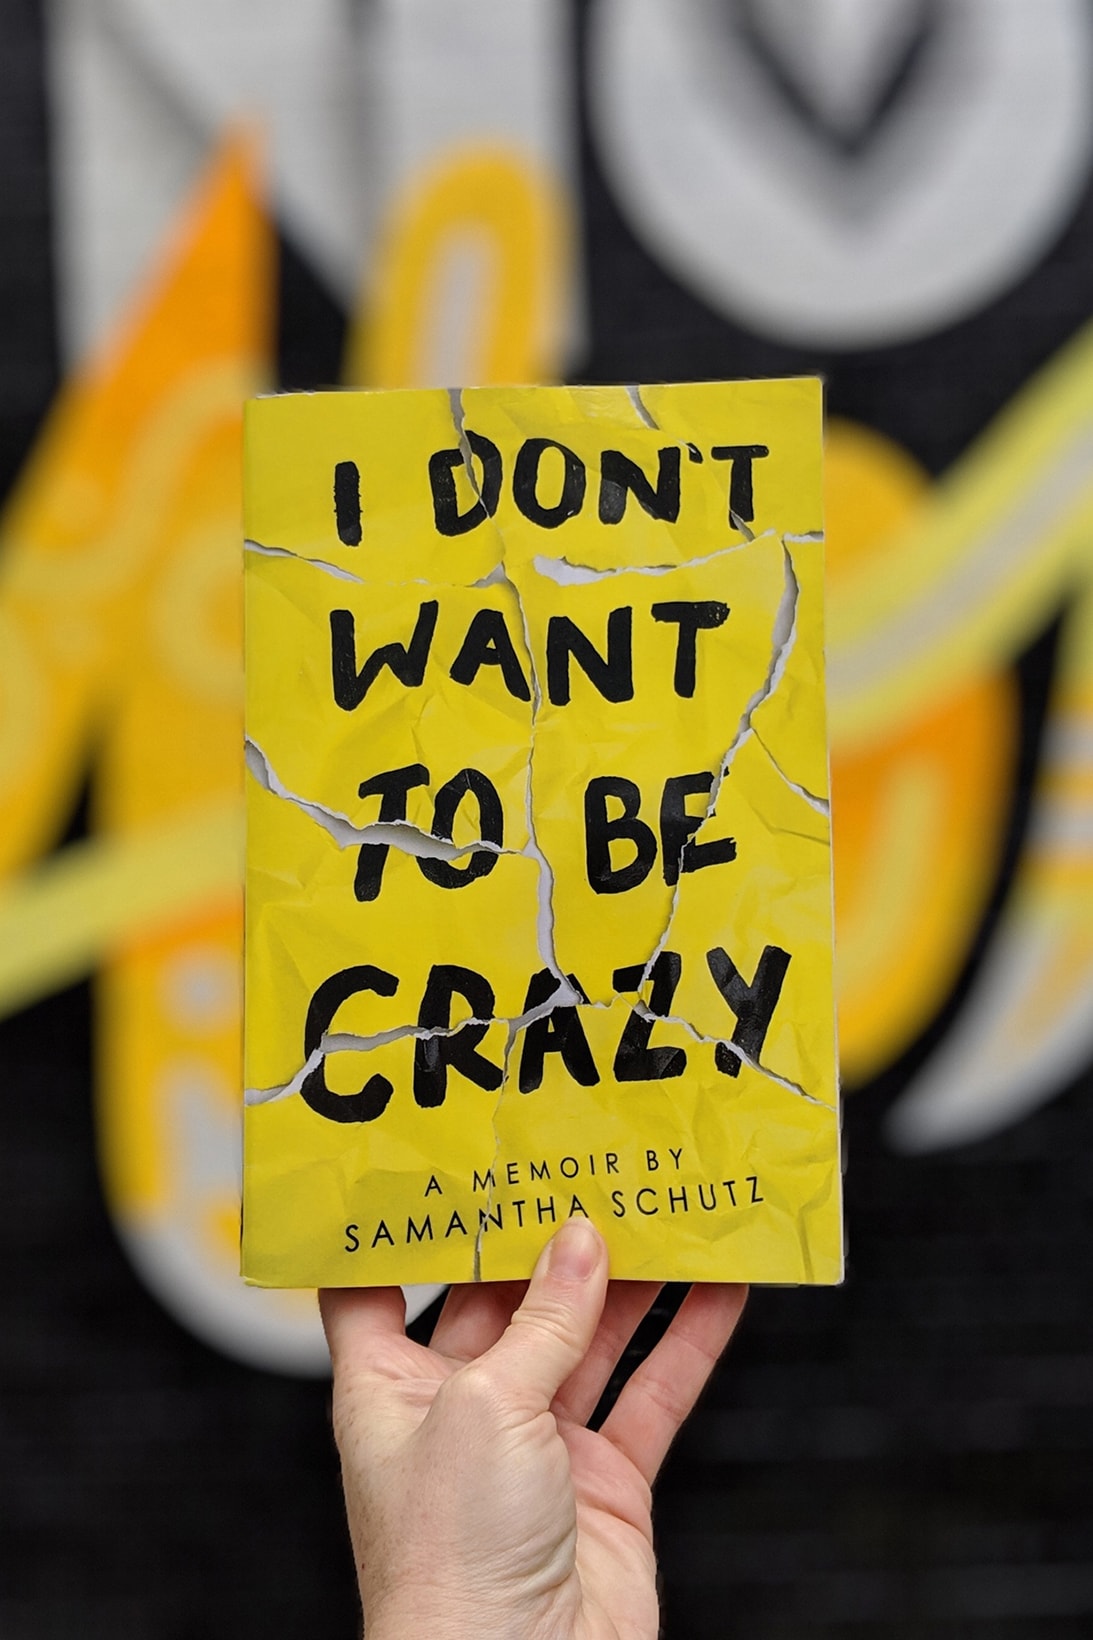 mental health awareness week anxiety attacks depression i dont want to be crazy samantha schutz